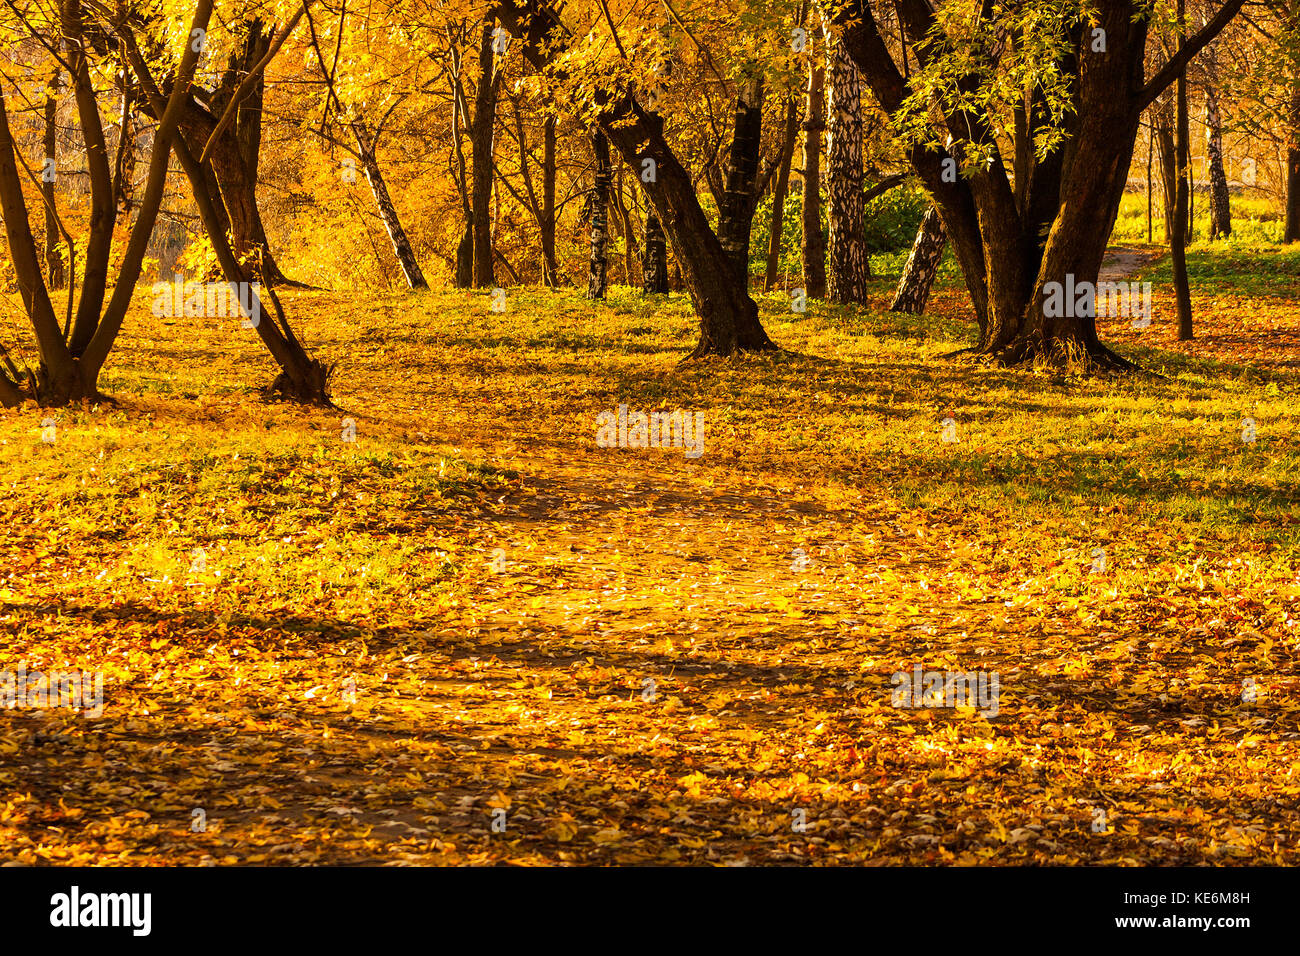 Maple and birch trees in a park by an autumn day with yellow, green and red leaves and grass around covered by foliage. Stock Photo